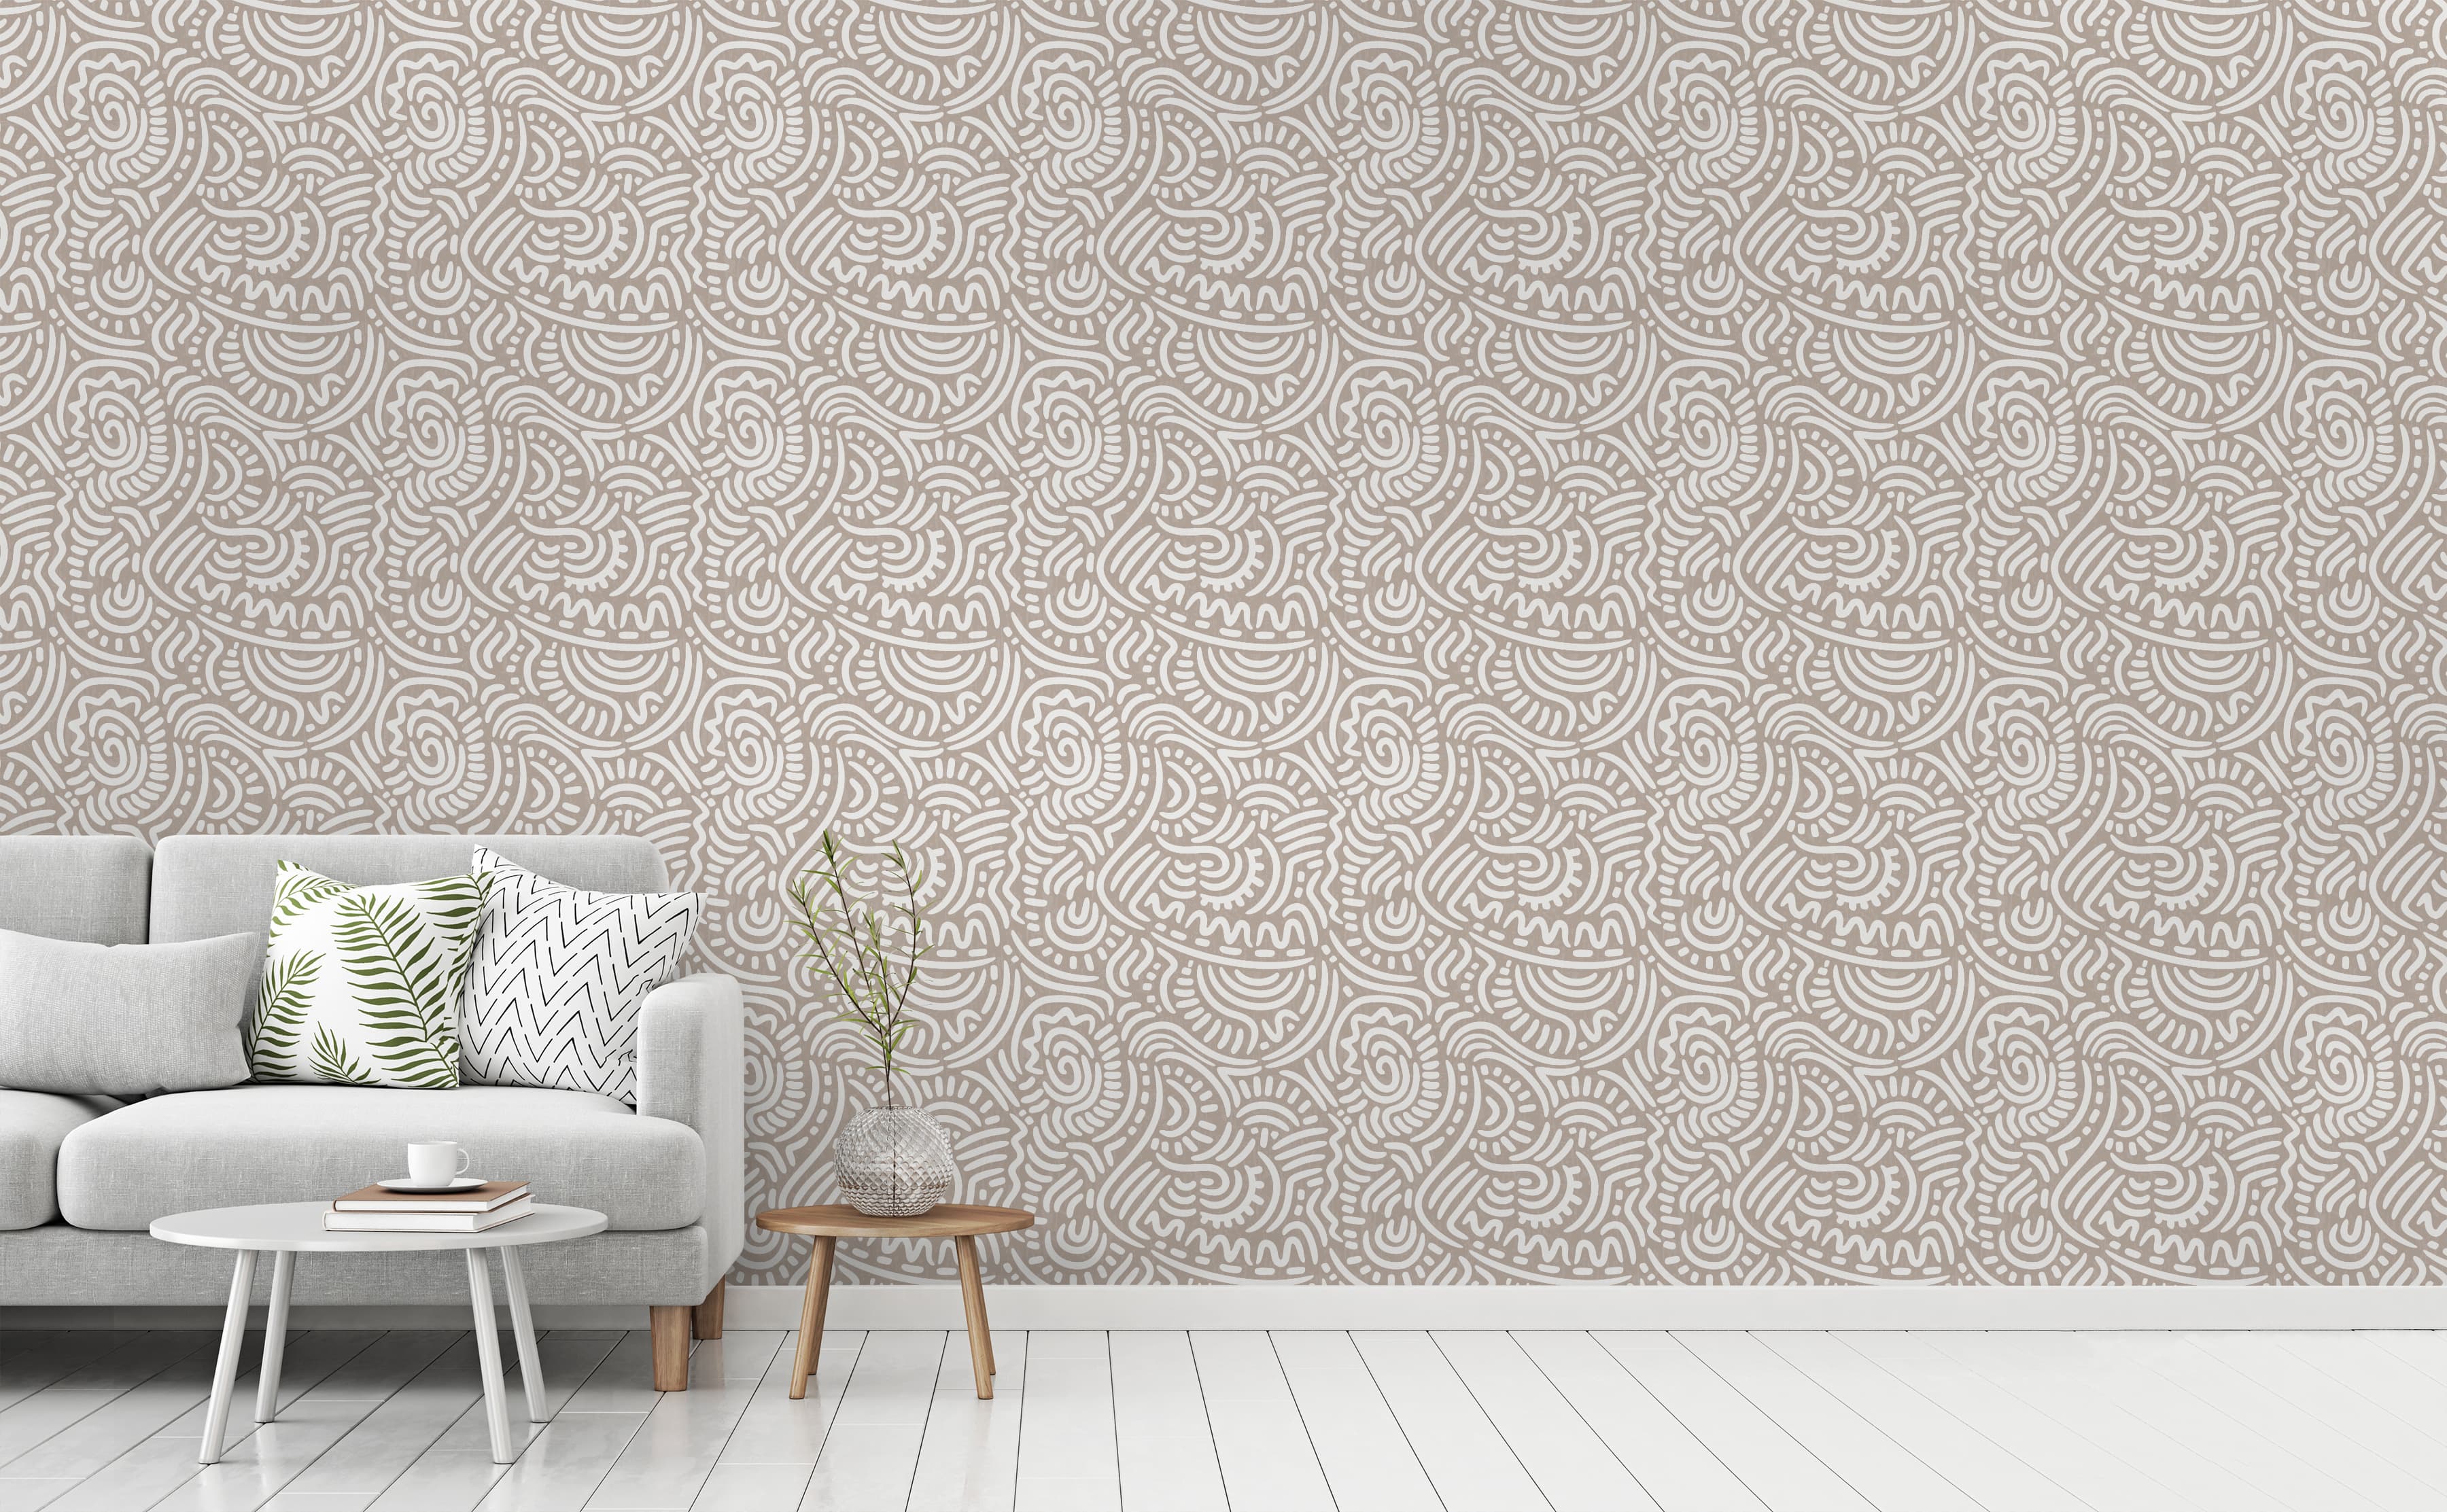 BRANCHY Autumn Wallpaper - Designer Collection - Wallpaper - Products